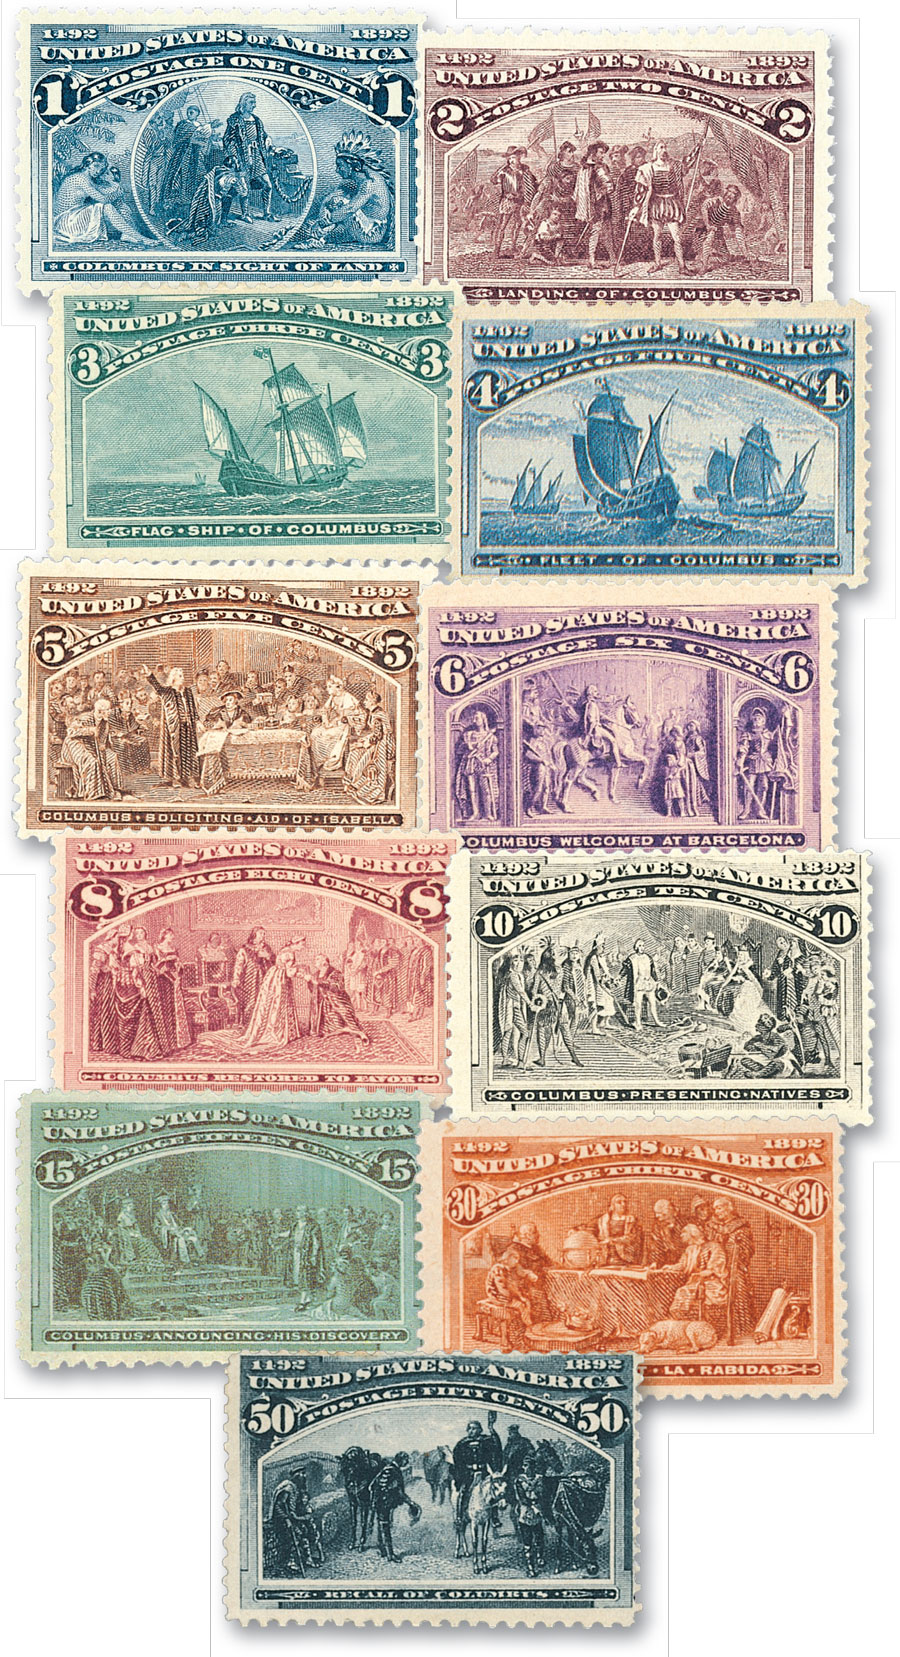 U.S. #230-40 â€“ The first 11 Columbian stamps.